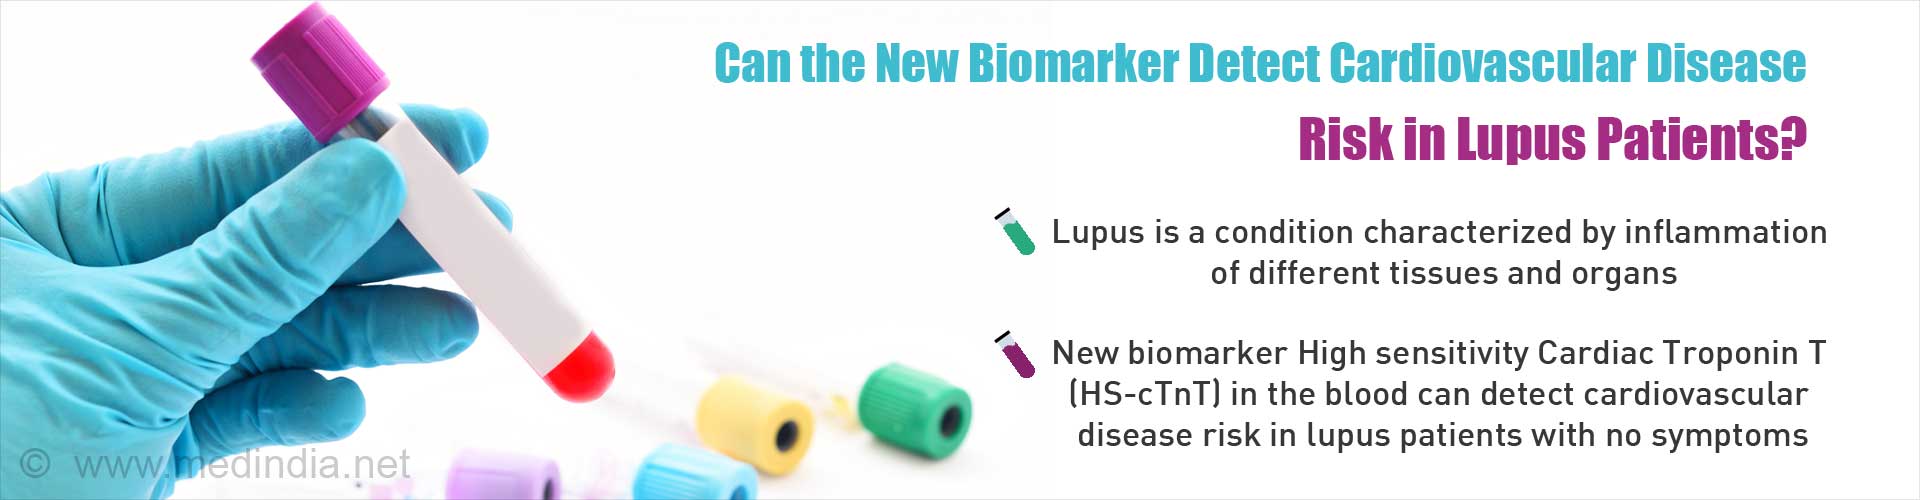 Can the new biomarker detect cardiovascular disease risk in lupus patients?
- Lupus is a condition characterized by inflammation in different tissues and organs
- New biomarker high sensitivity cardiac roponin T (HS-cTnT) in the blood can detect cardiovascular disease risk in lupus patients with no symptoms